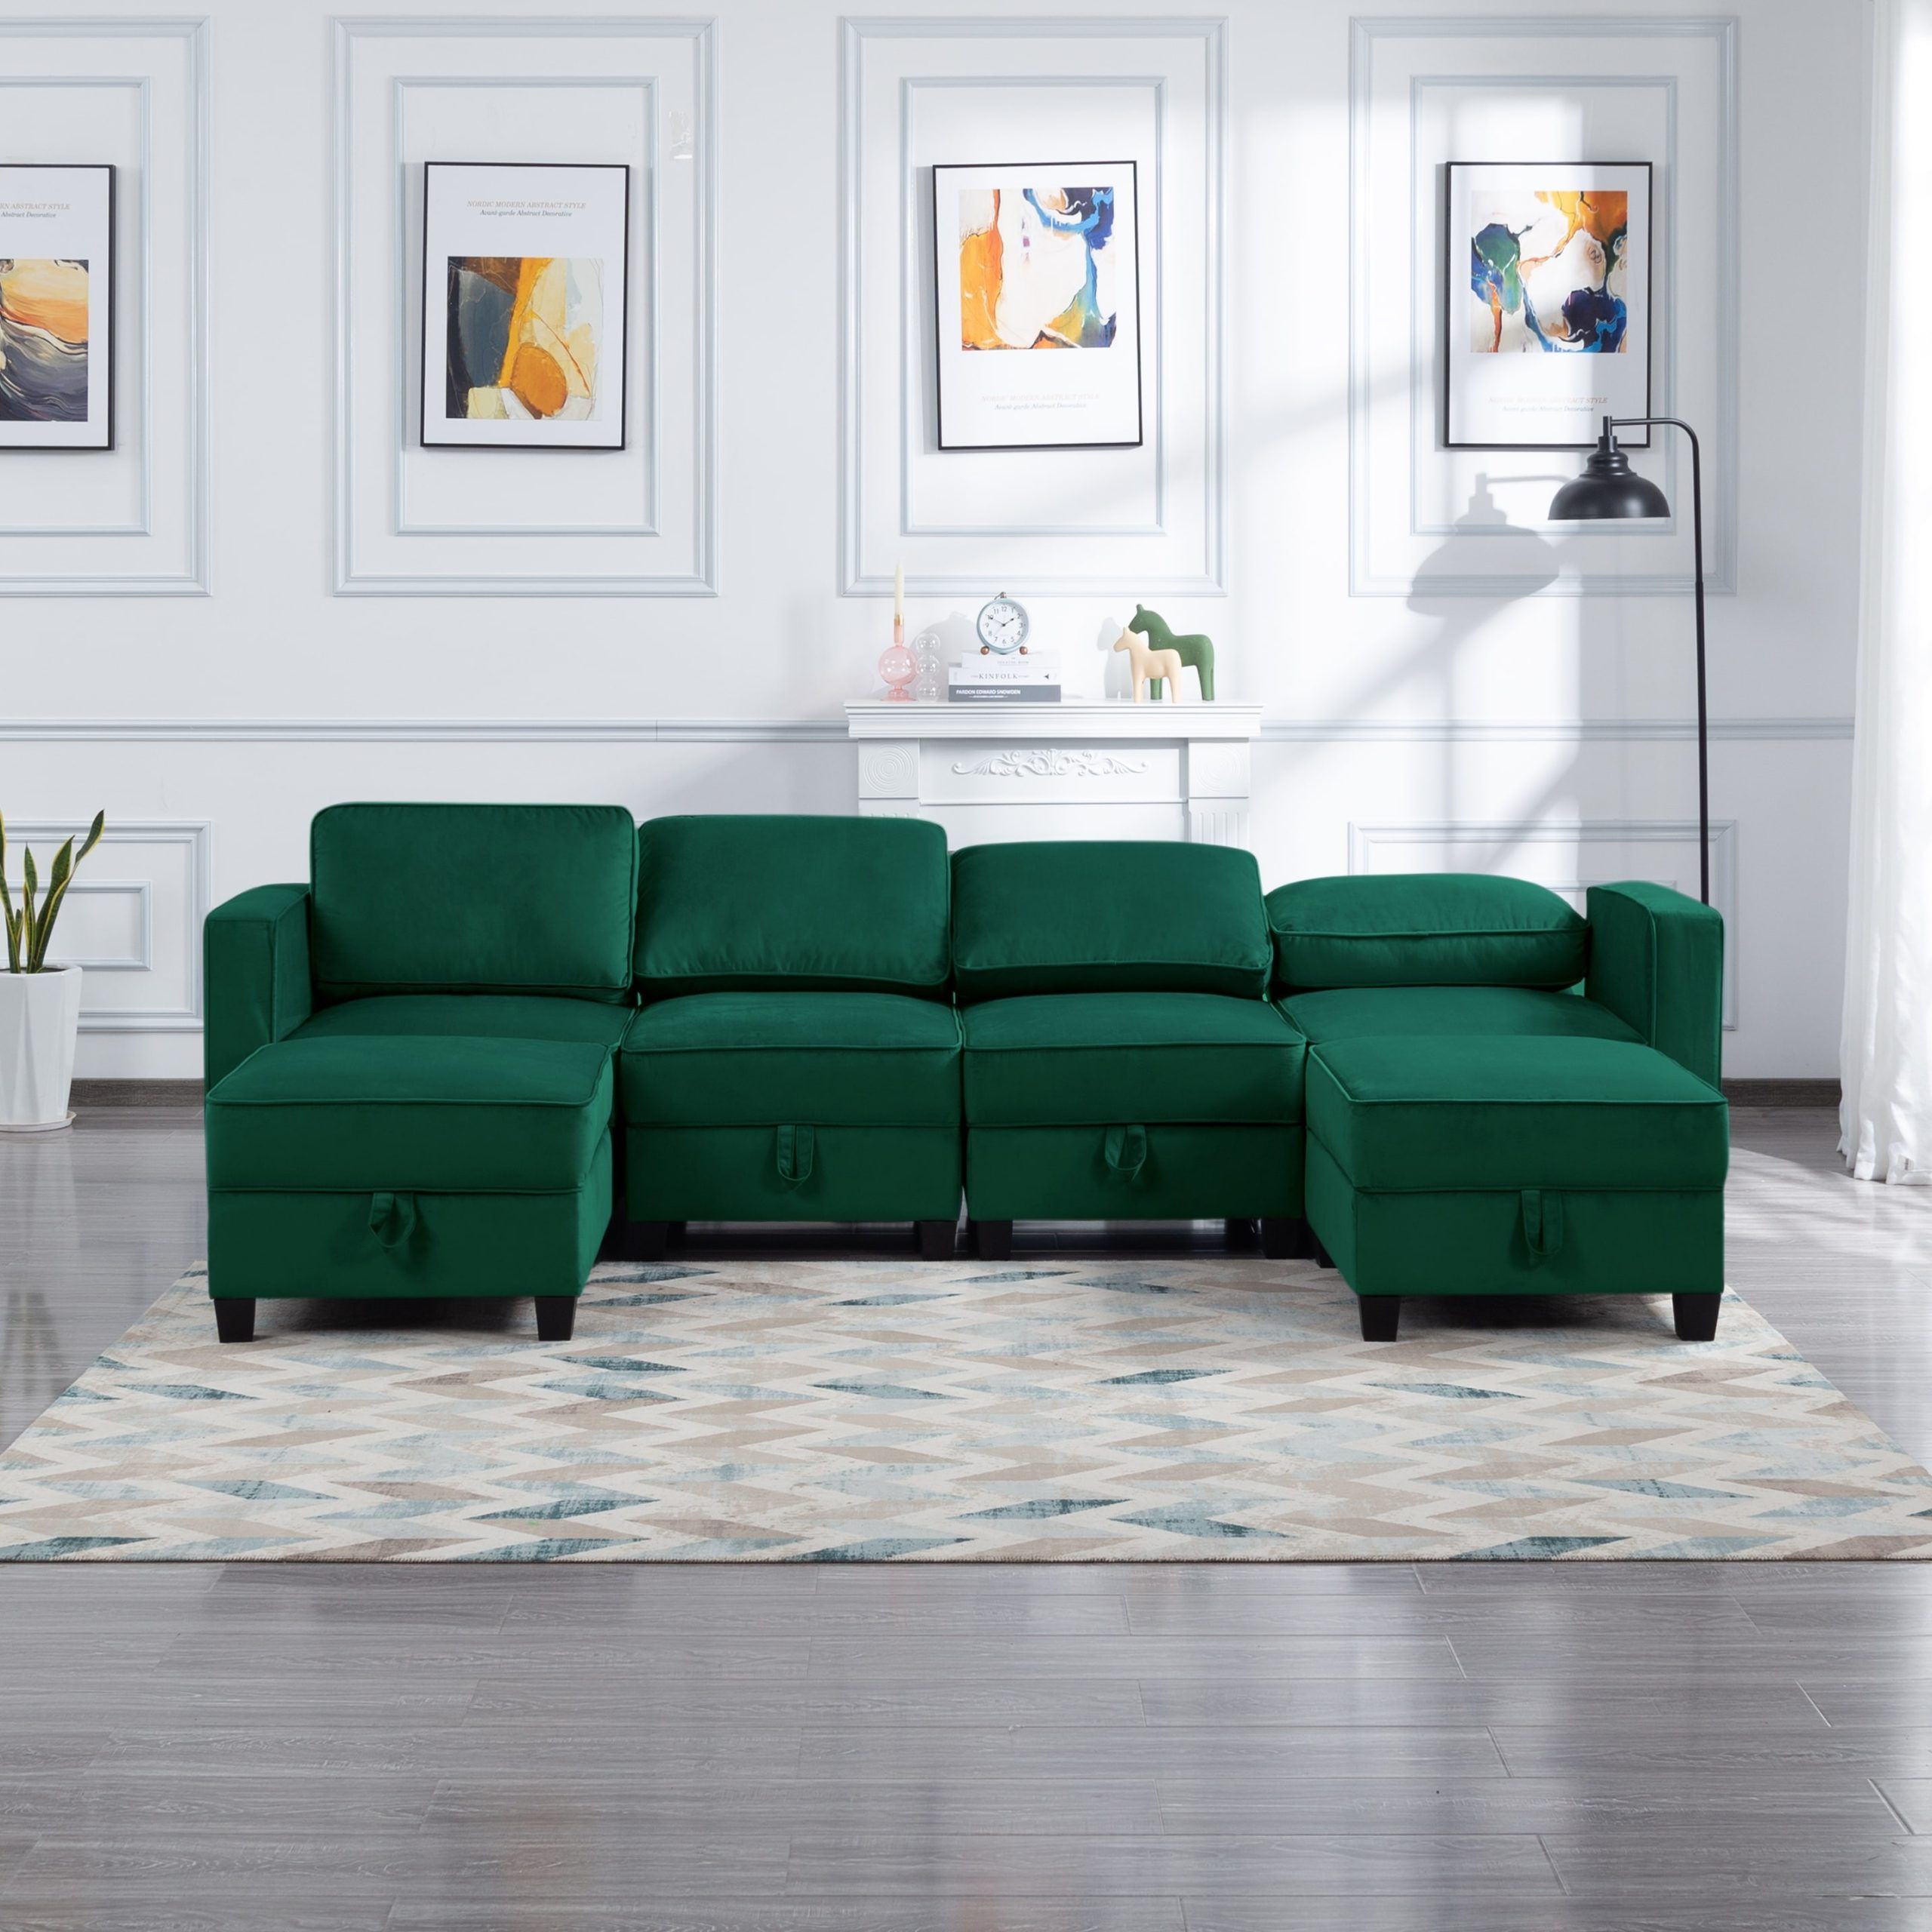 Green 116" Velvet Modular Sectional Sofa With Hidden Storage And Ottoman –  Bed Bath & Beyond – 39090598 With Regard To Green Velvet Modular Sectionals (View 12 of 15)